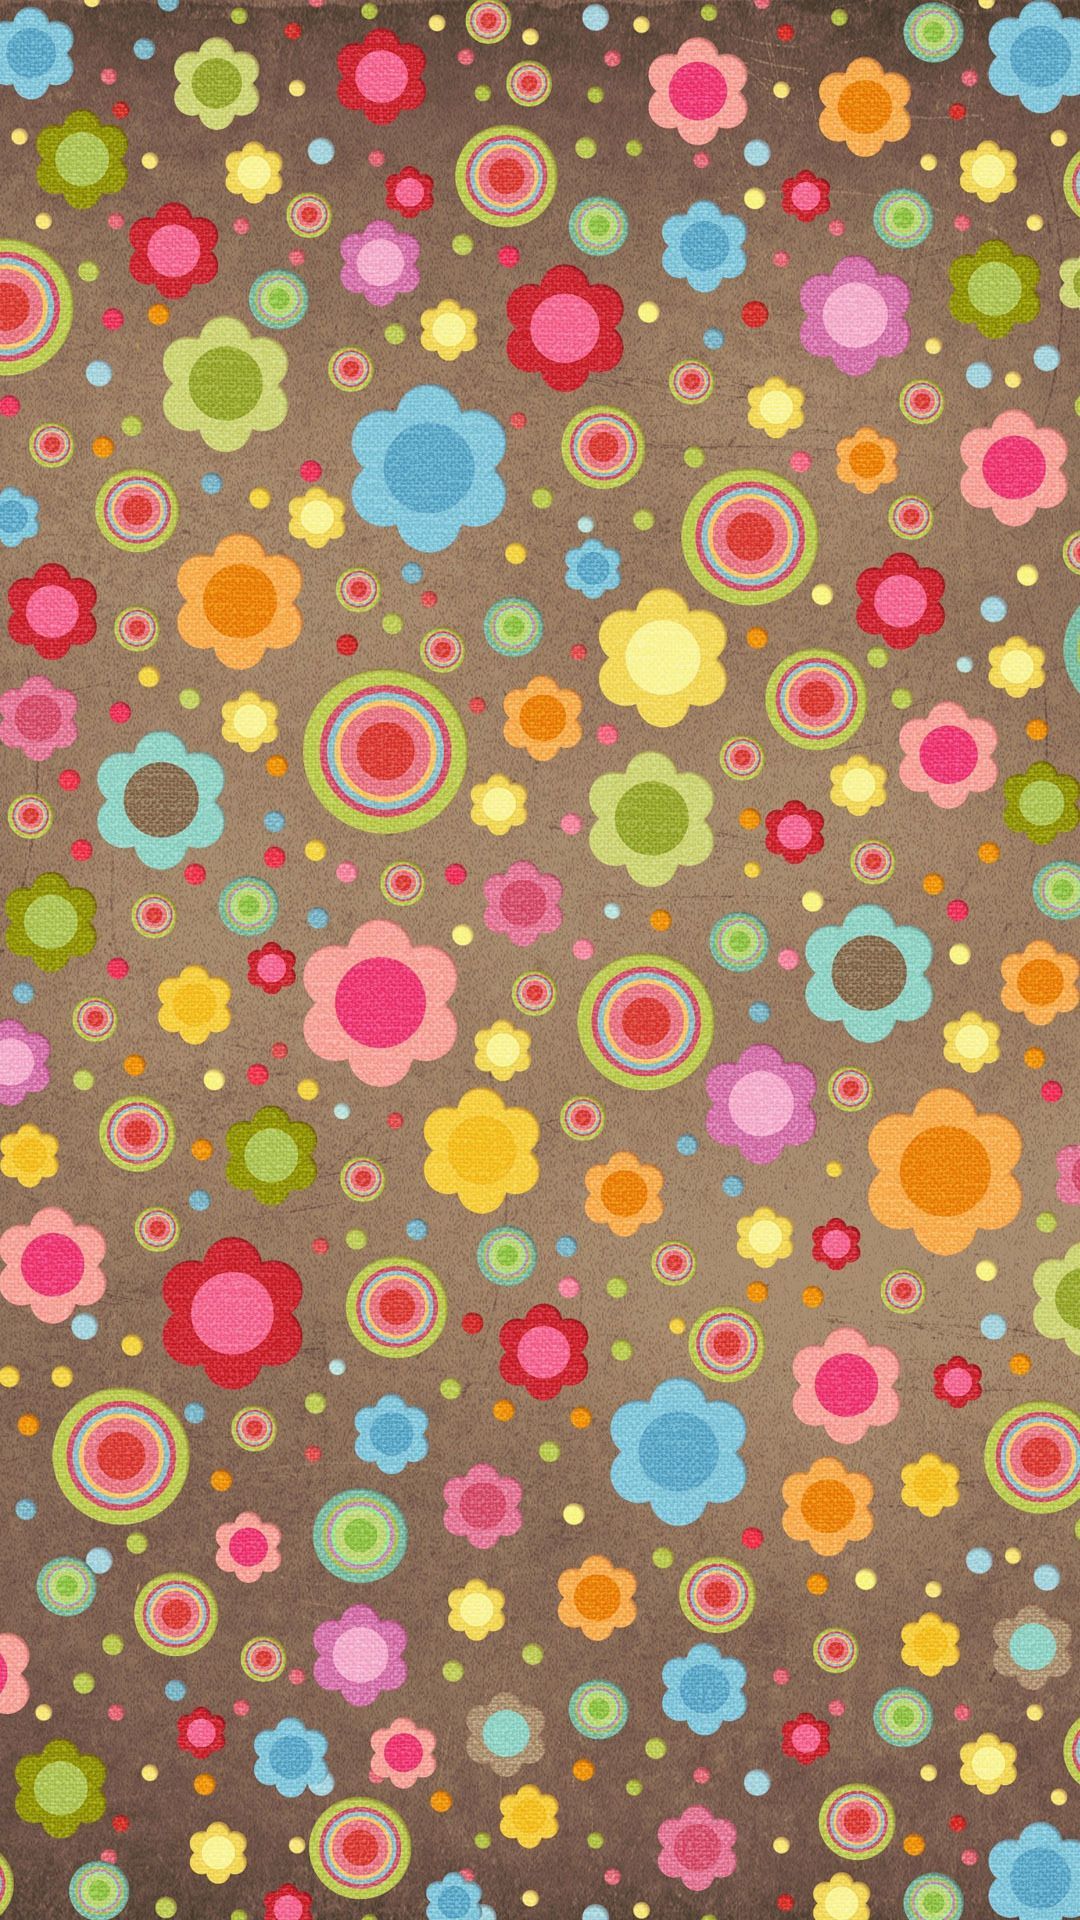 Colorful floral pattern Mobile Wallpaper 7178